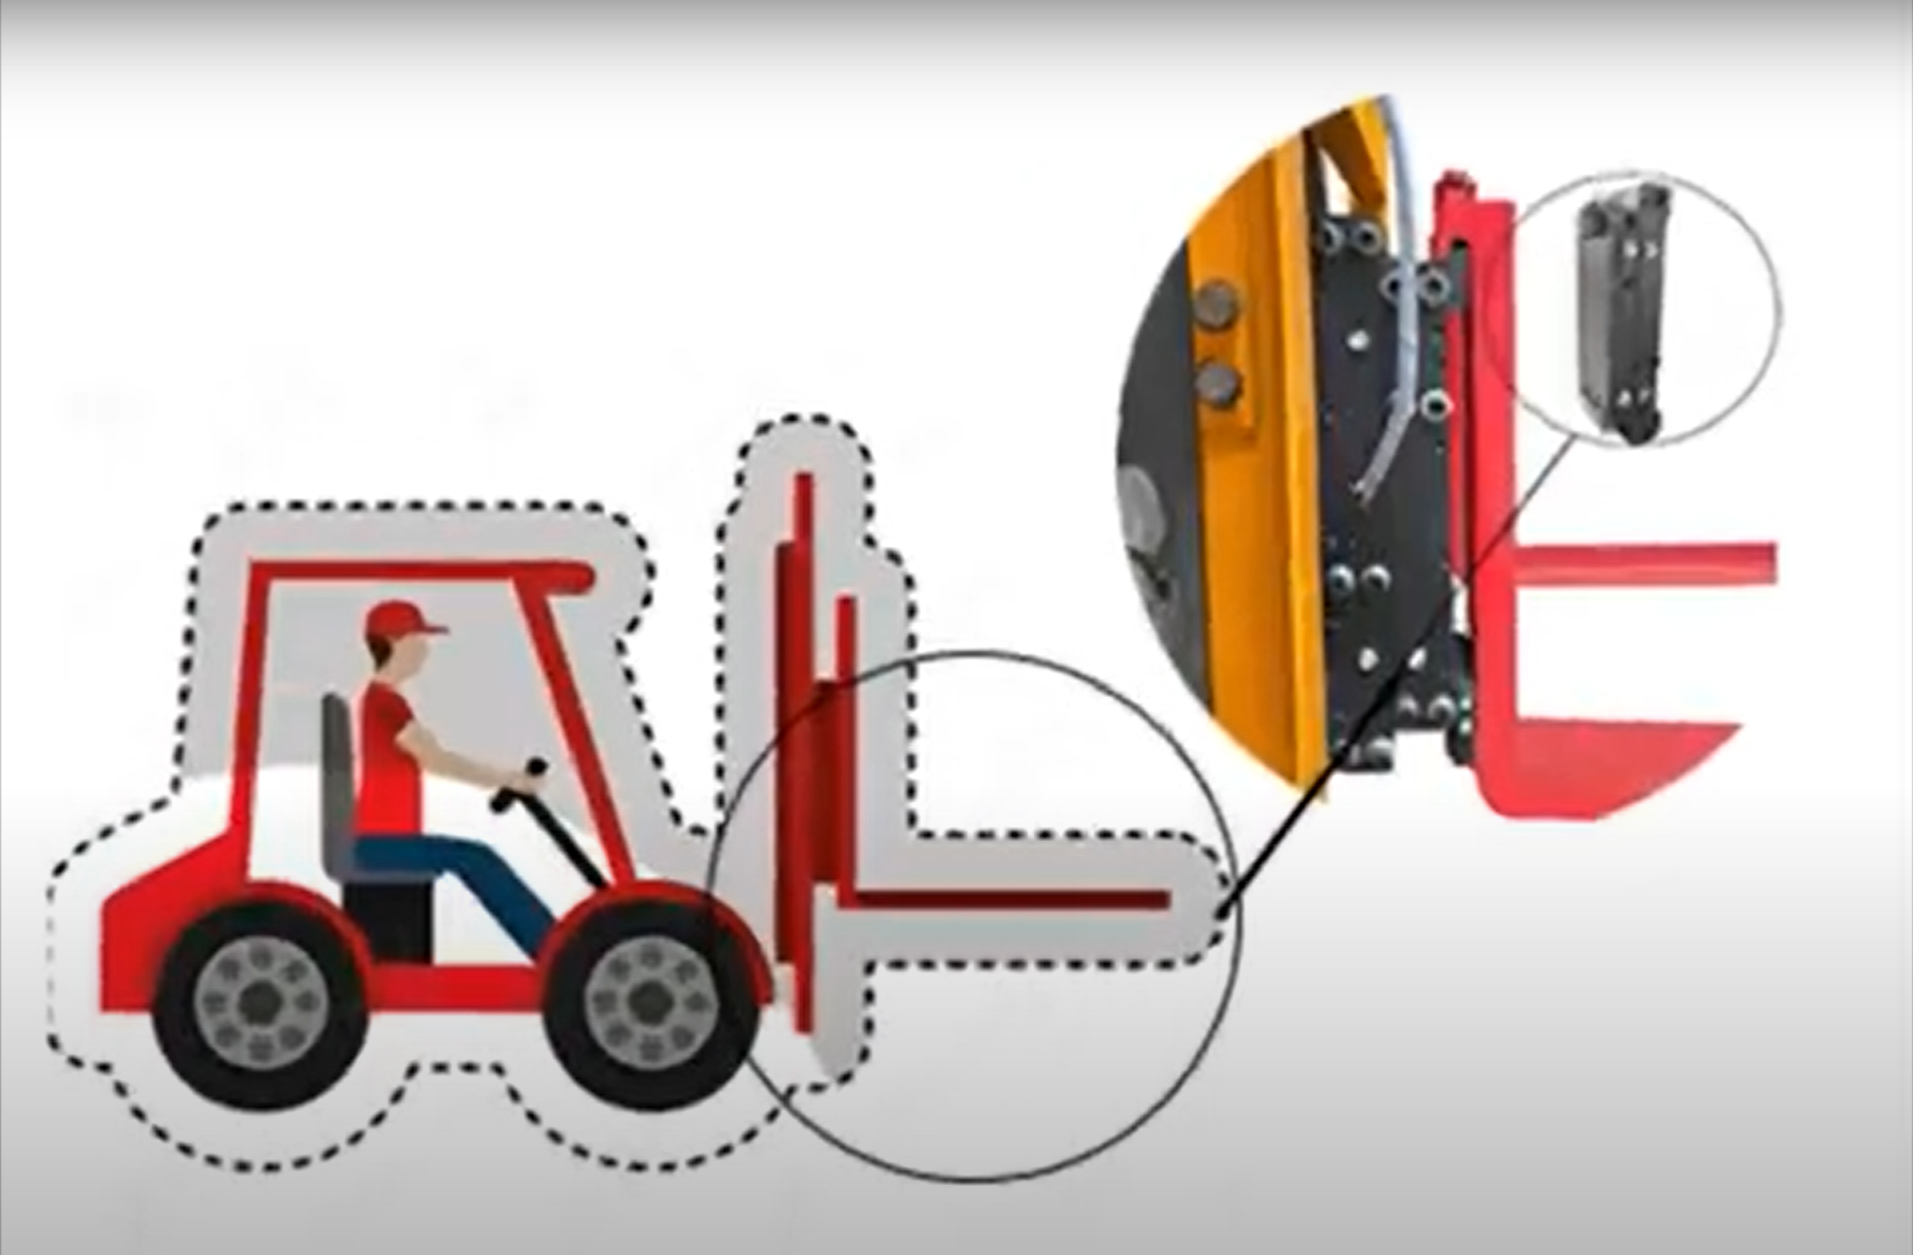 The necessity of installing weighing devices for forklifts